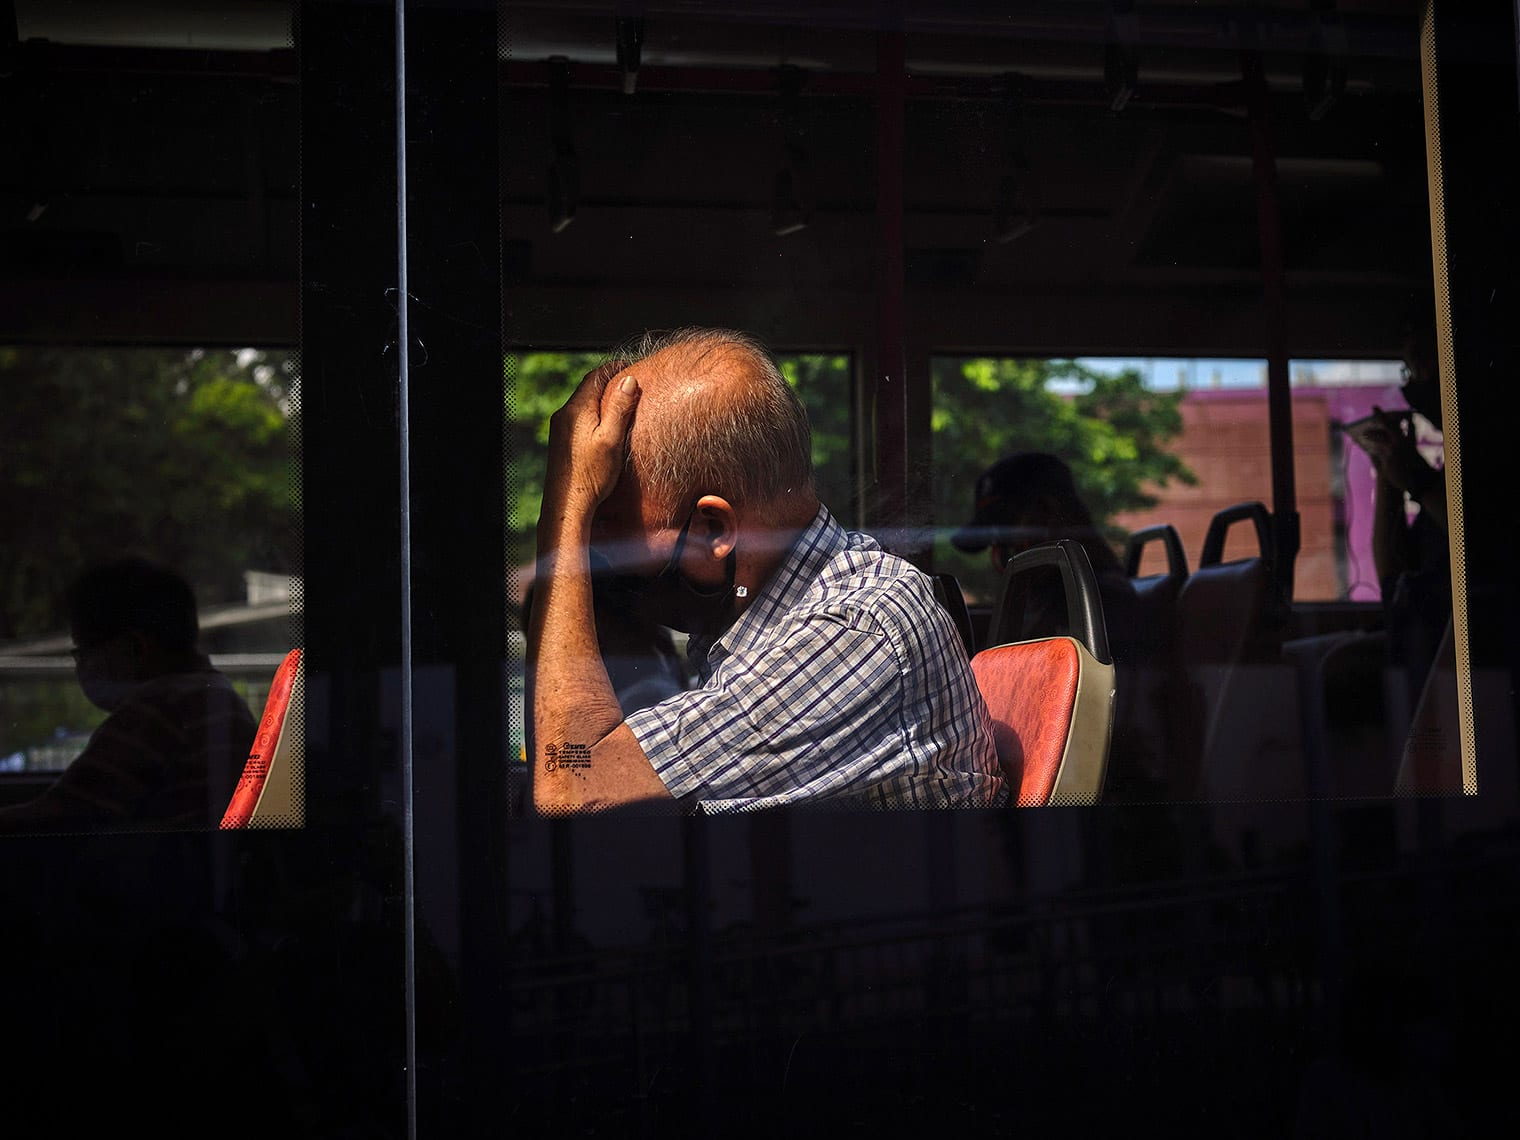 Masked man leans against glass window of a bus, cradling his head